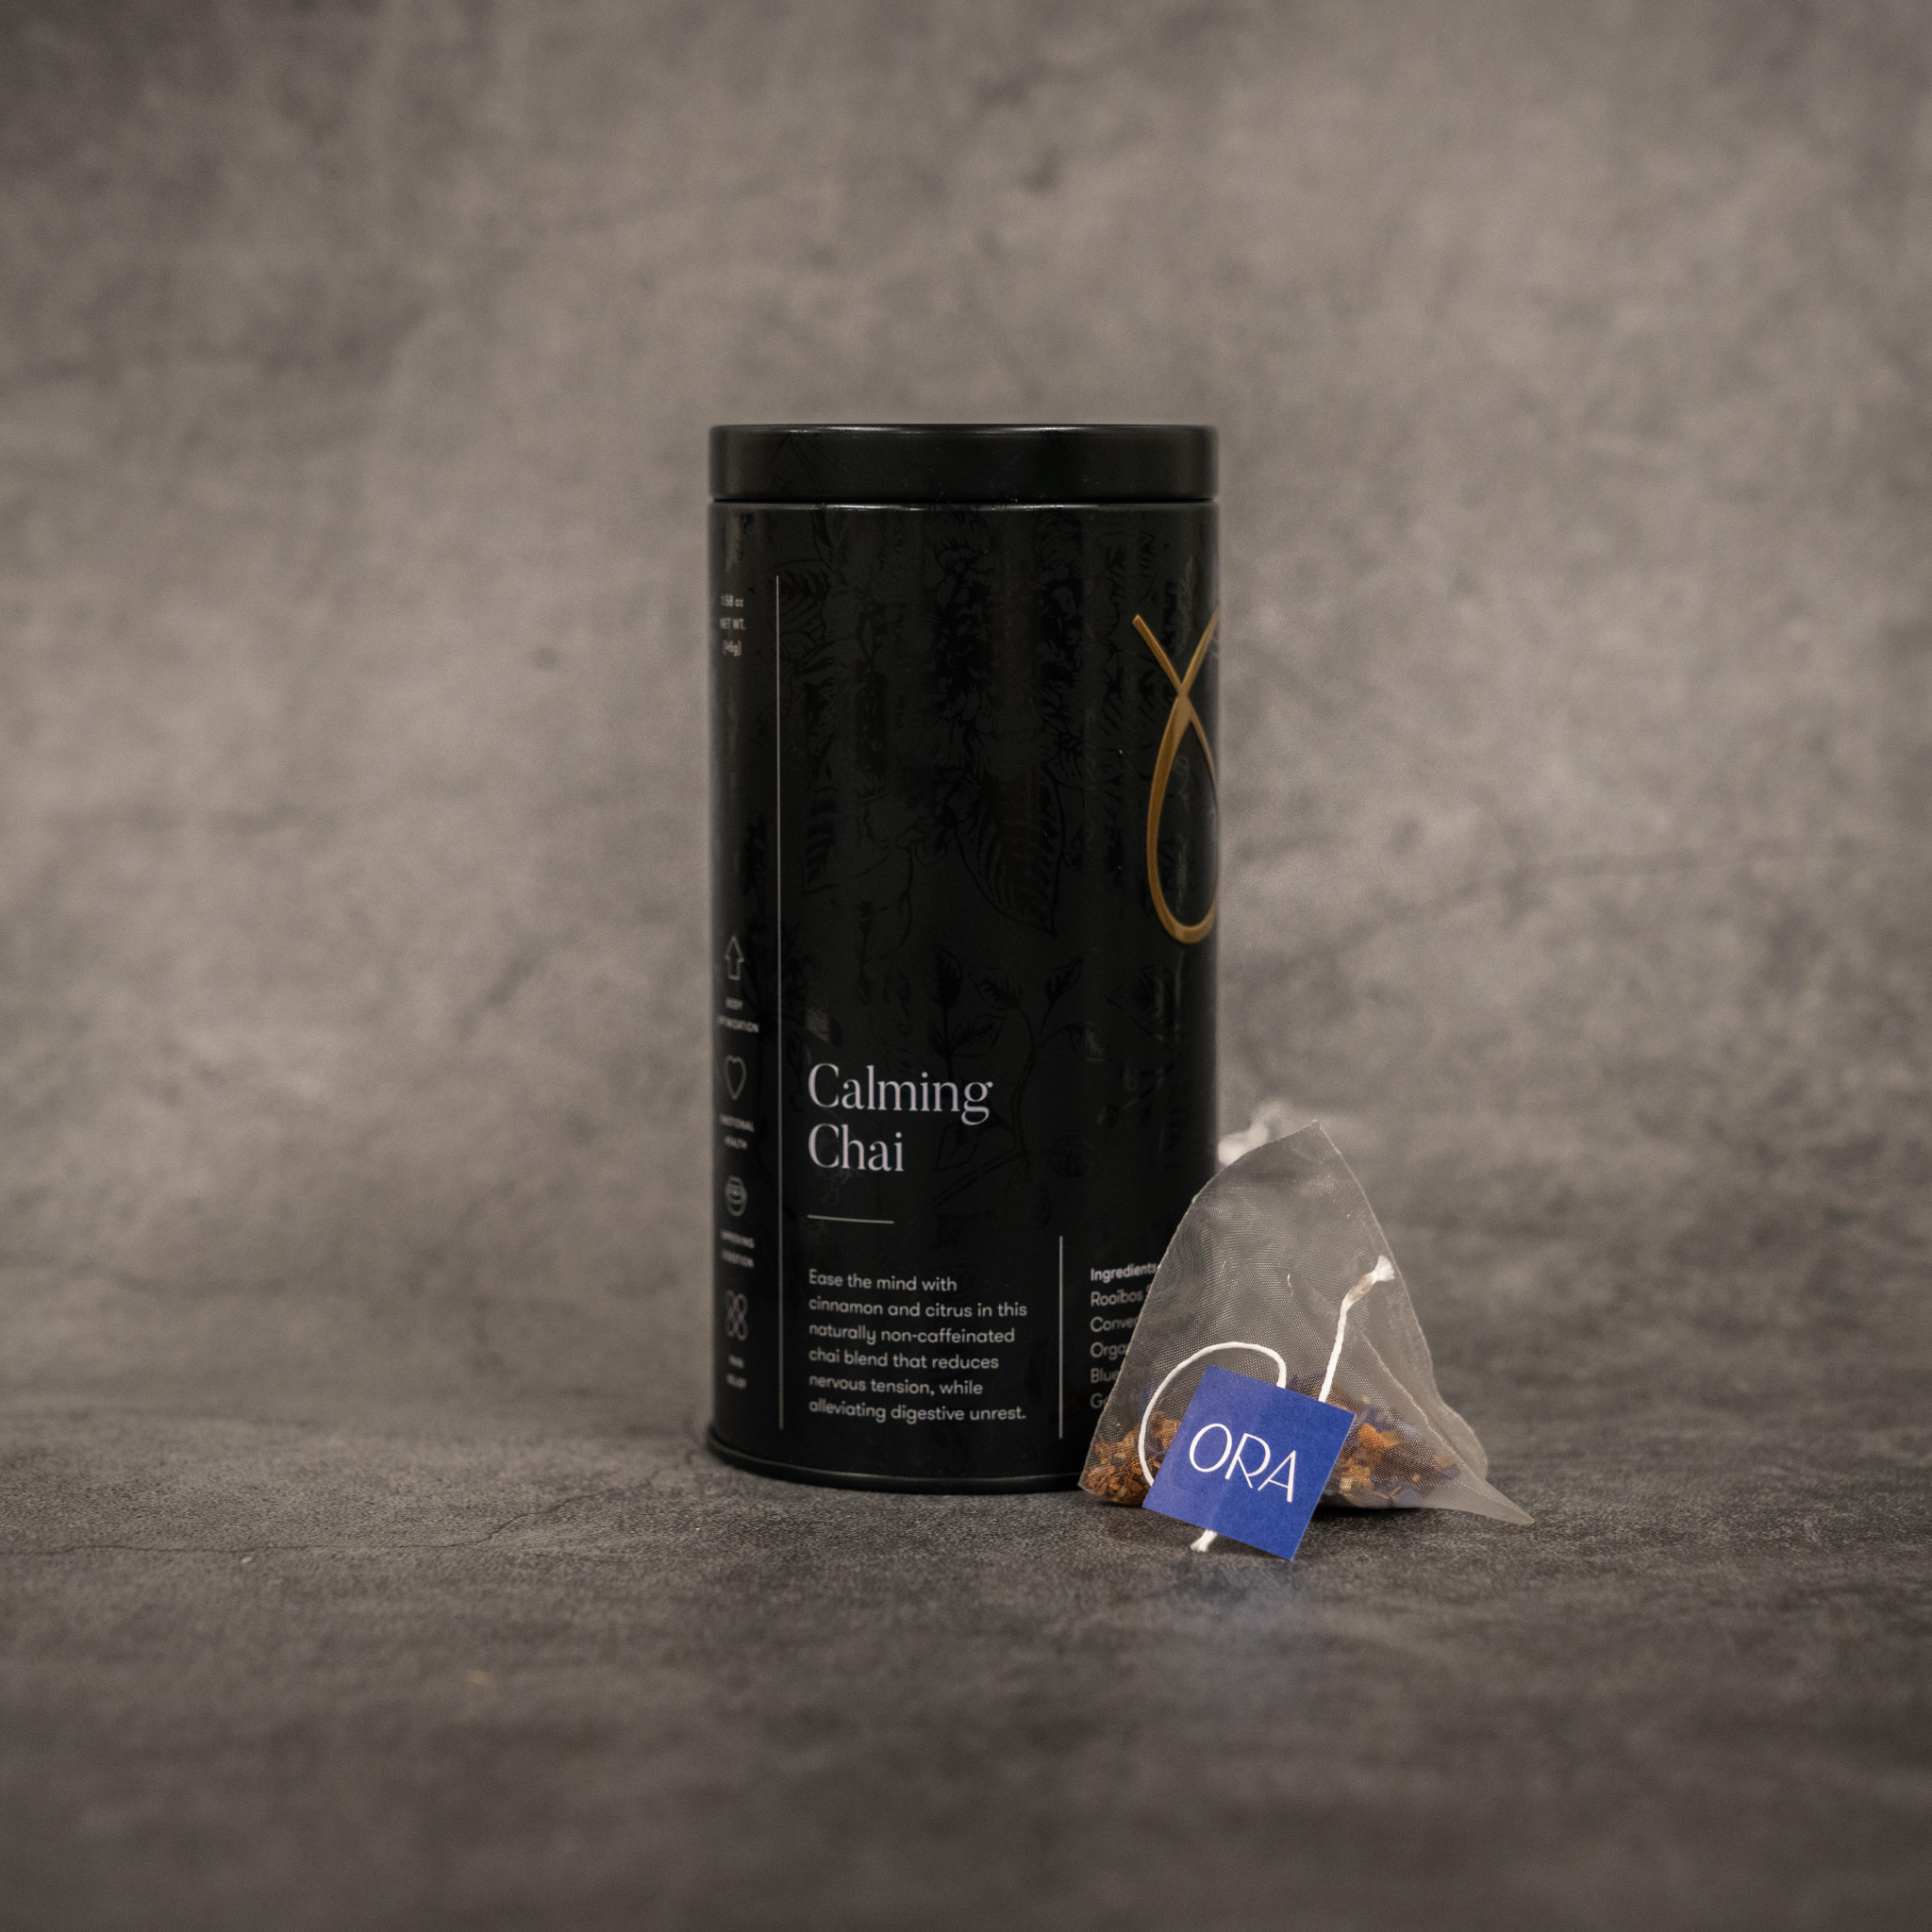 On the left, a black metal cylinder tin of tea reading "Calming Chai". On the right, a translucent tea bag with a string printed with the ORA logo. 